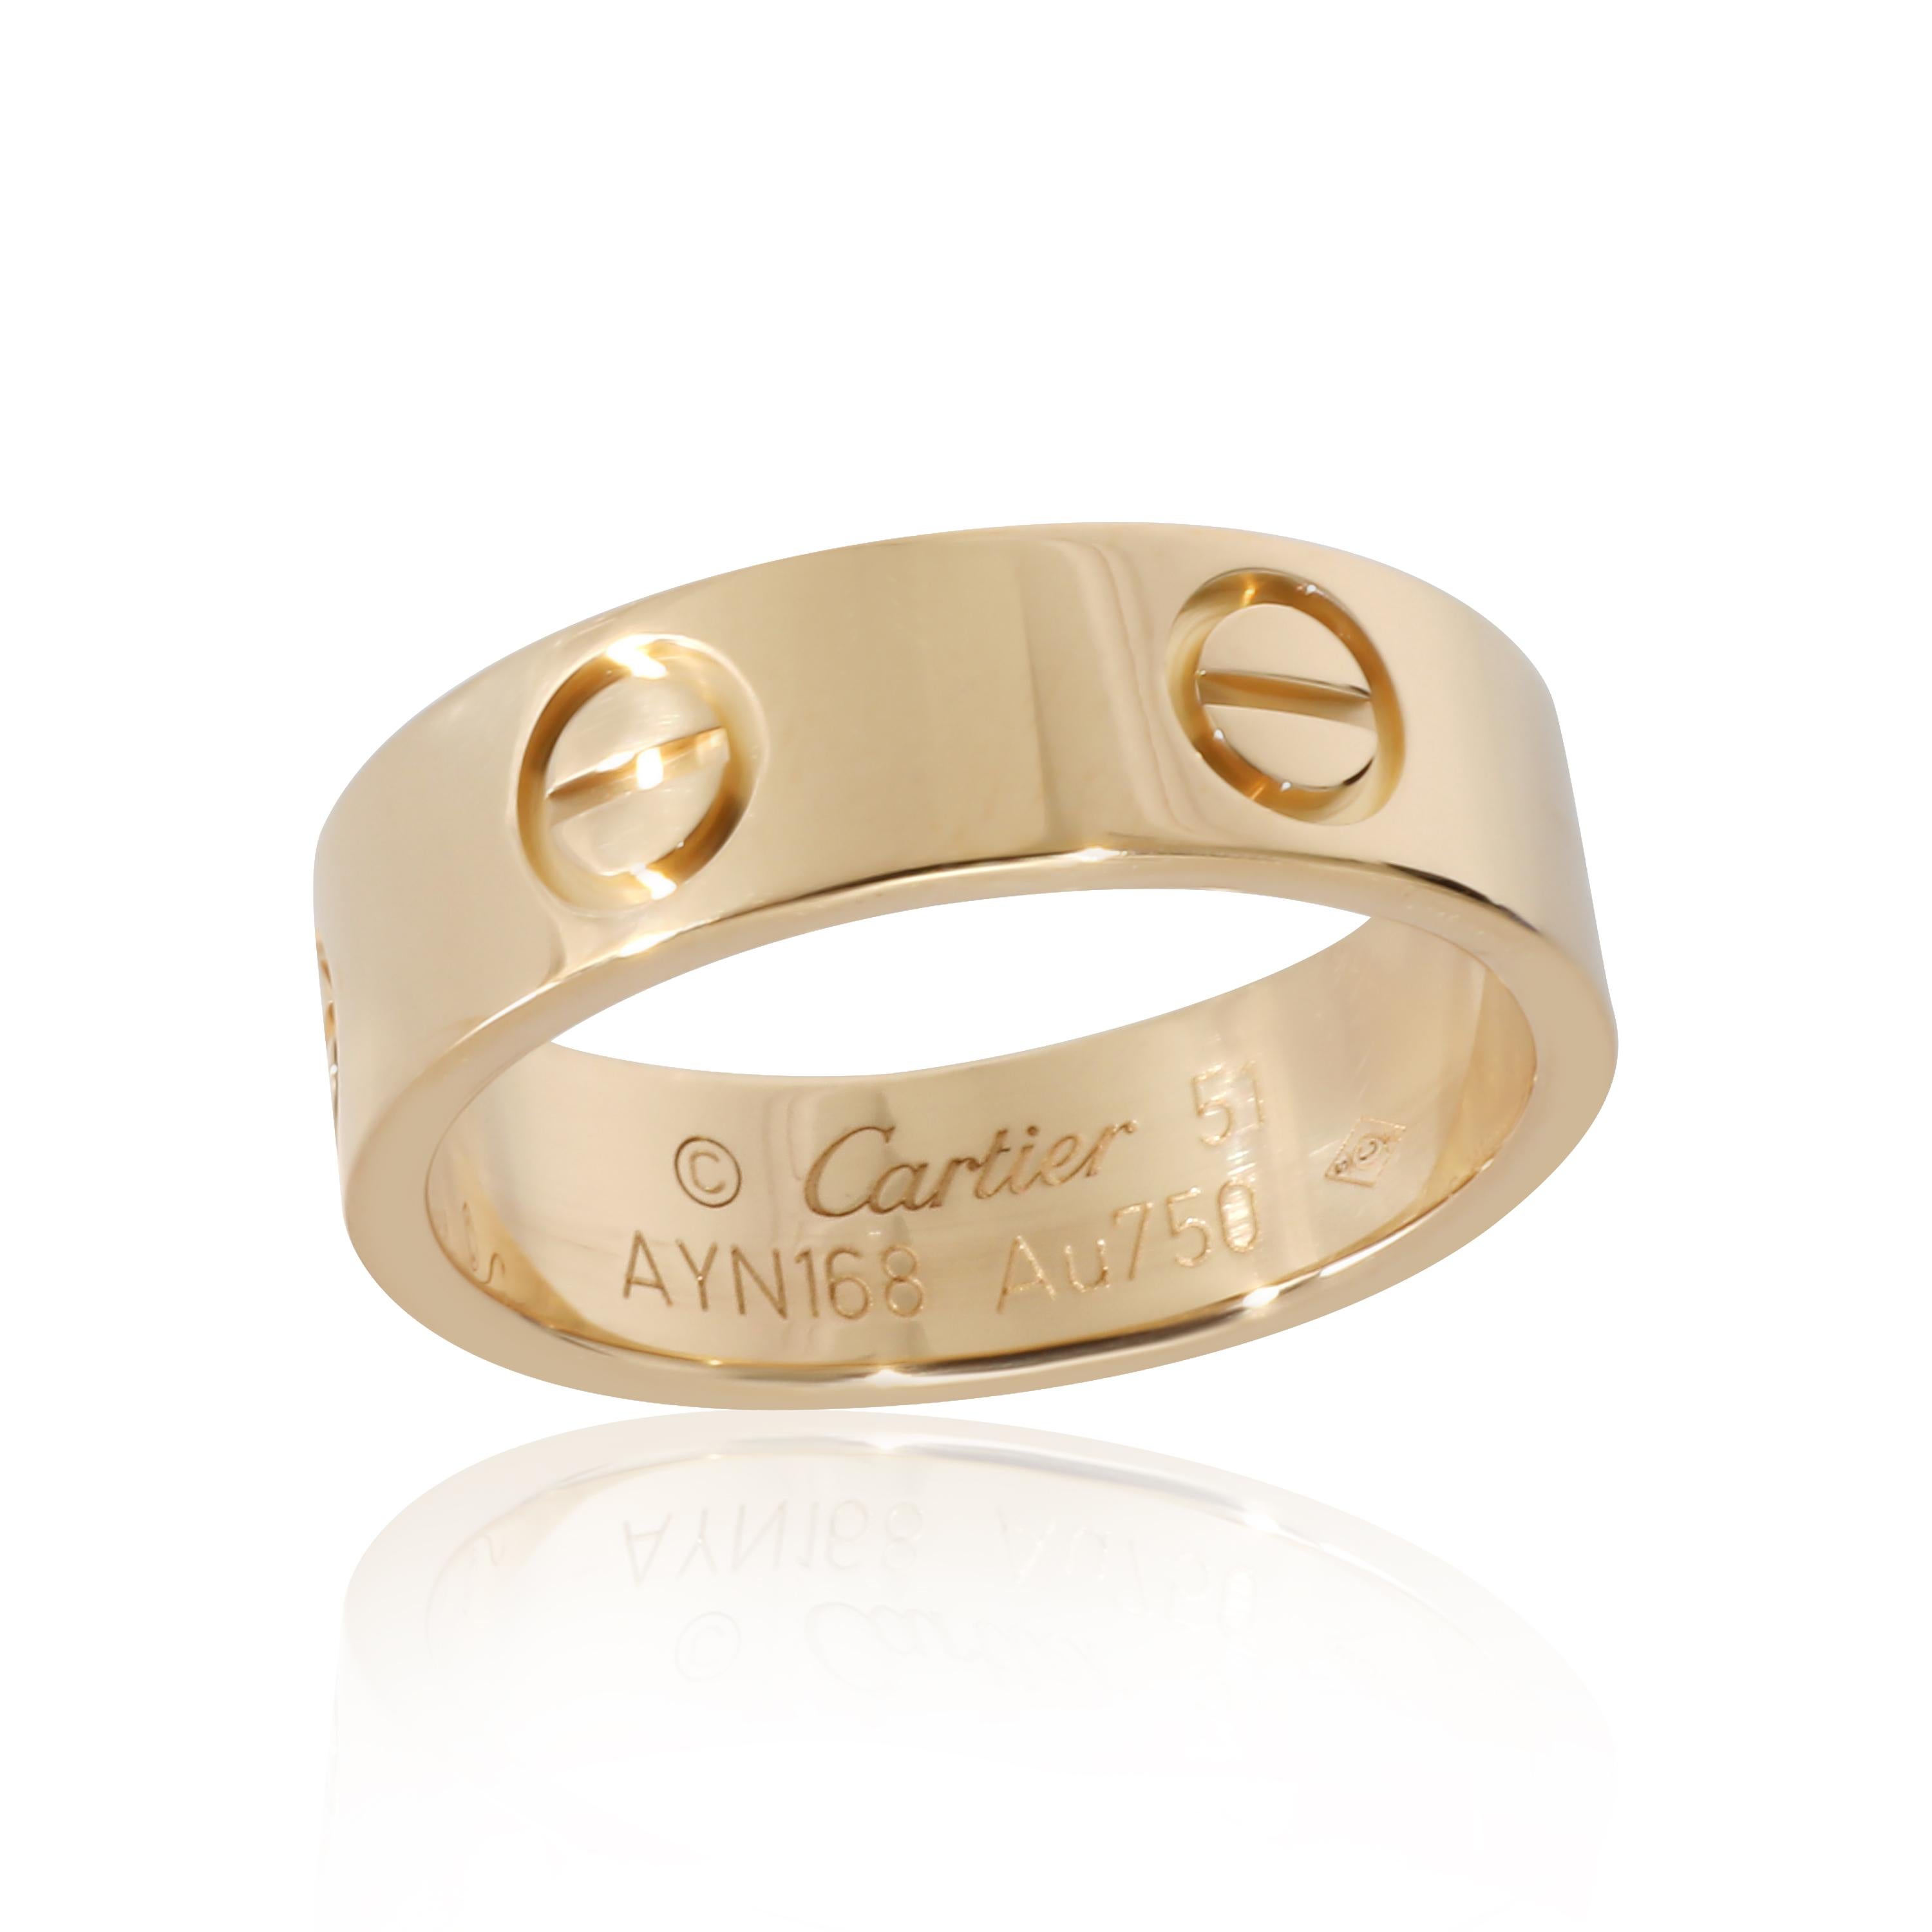 Cartier Love Ring in 18k Yellow Gold

PRIMARY DETAILS
SKU: 133932
Listing Title: Cartier Love Ring in 18k Yellow Gold
Condition Description: Cartier's Love collection is the epitome of iconic, from the recognizable designs to the history behind the